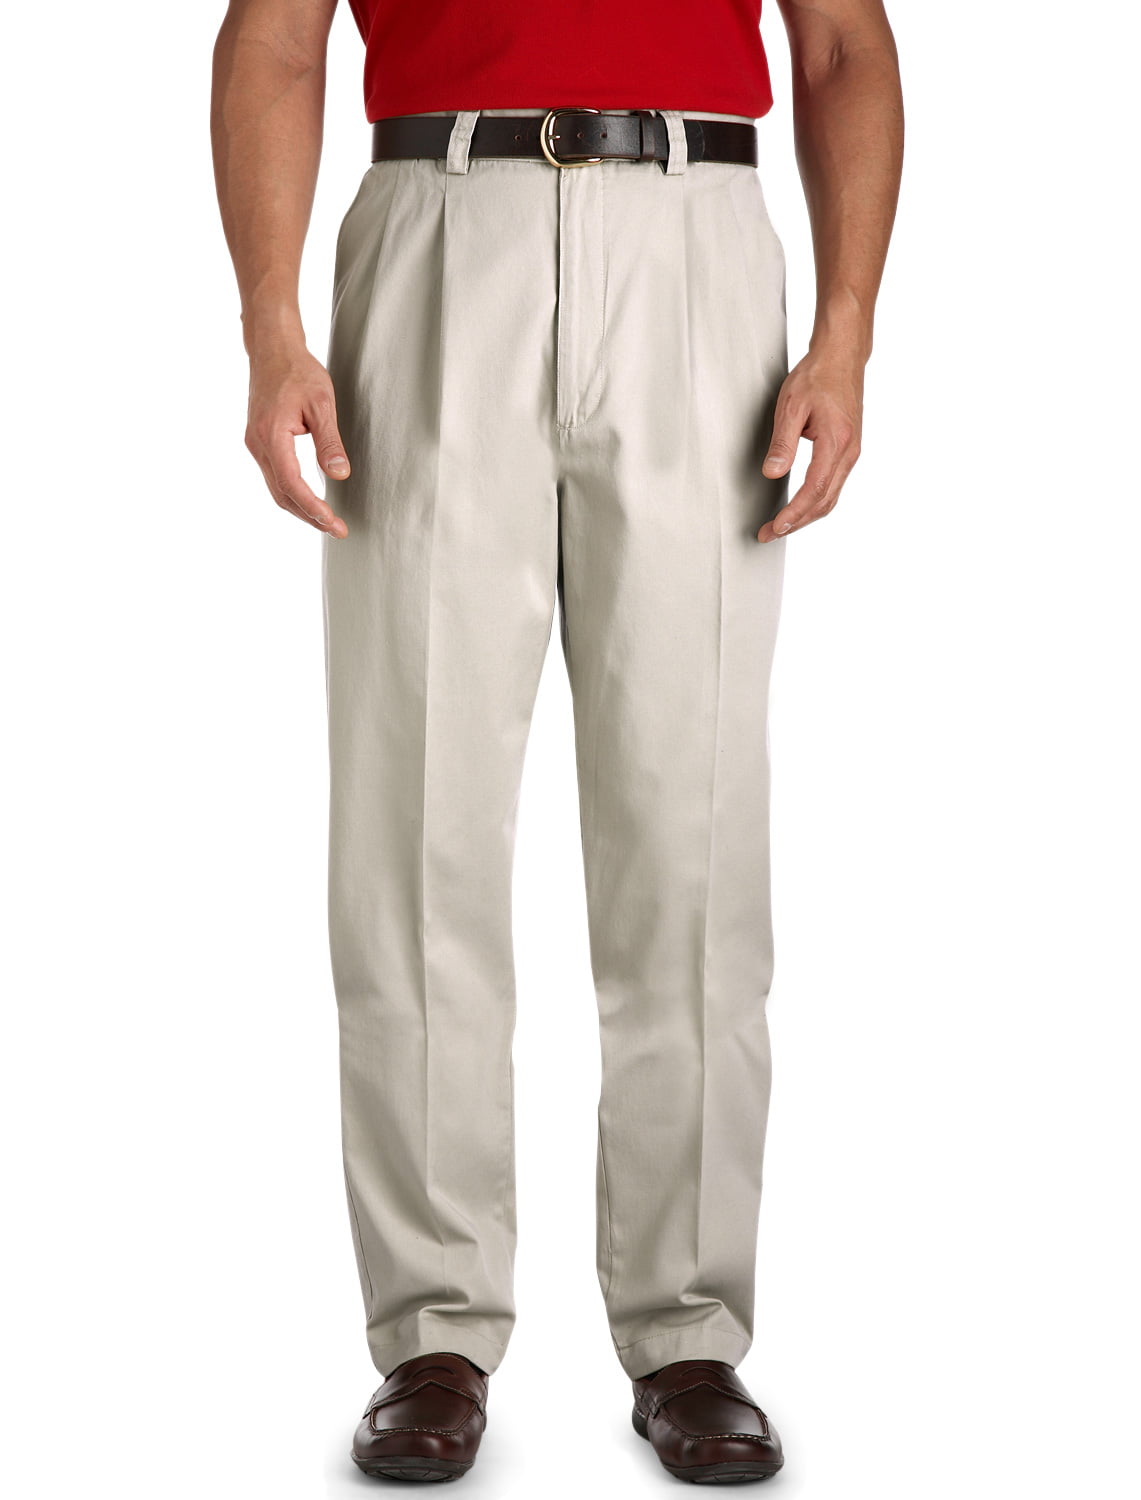 Harbor Bay by DXL Big and Tall Waist-Relaxer Casual Pants 